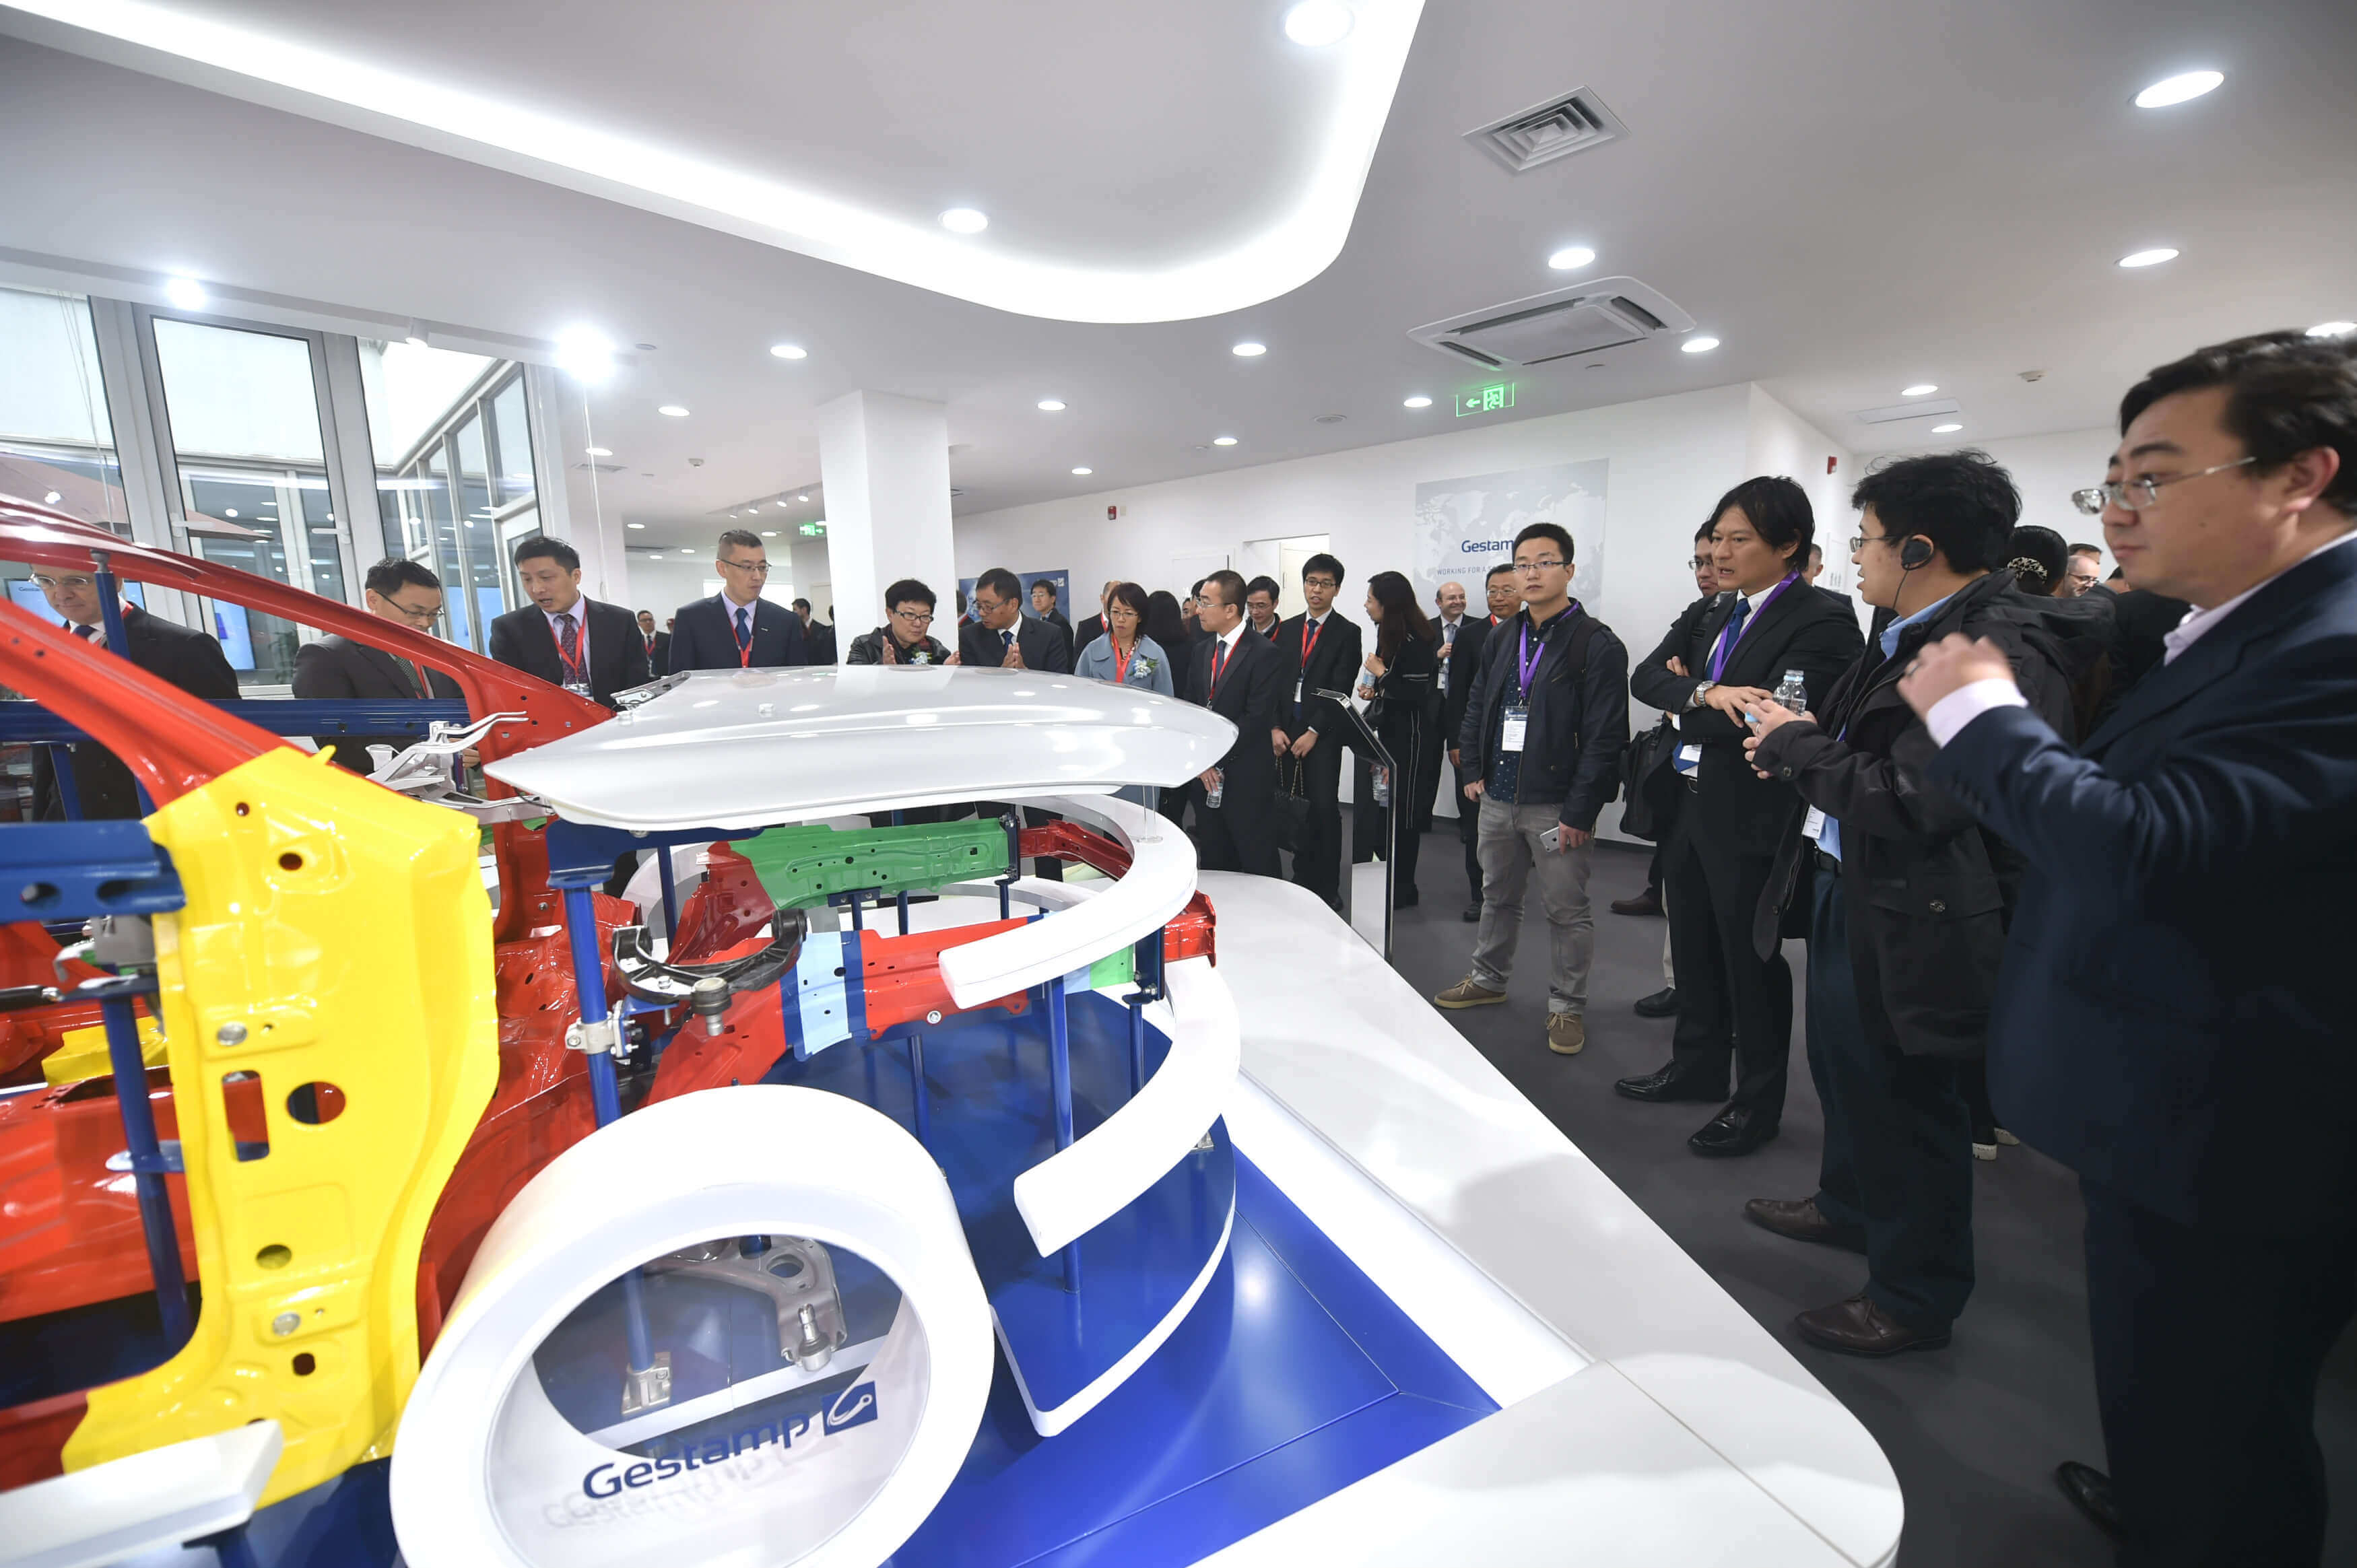 Gestamp inaugurates a new R&D center in Shanghai